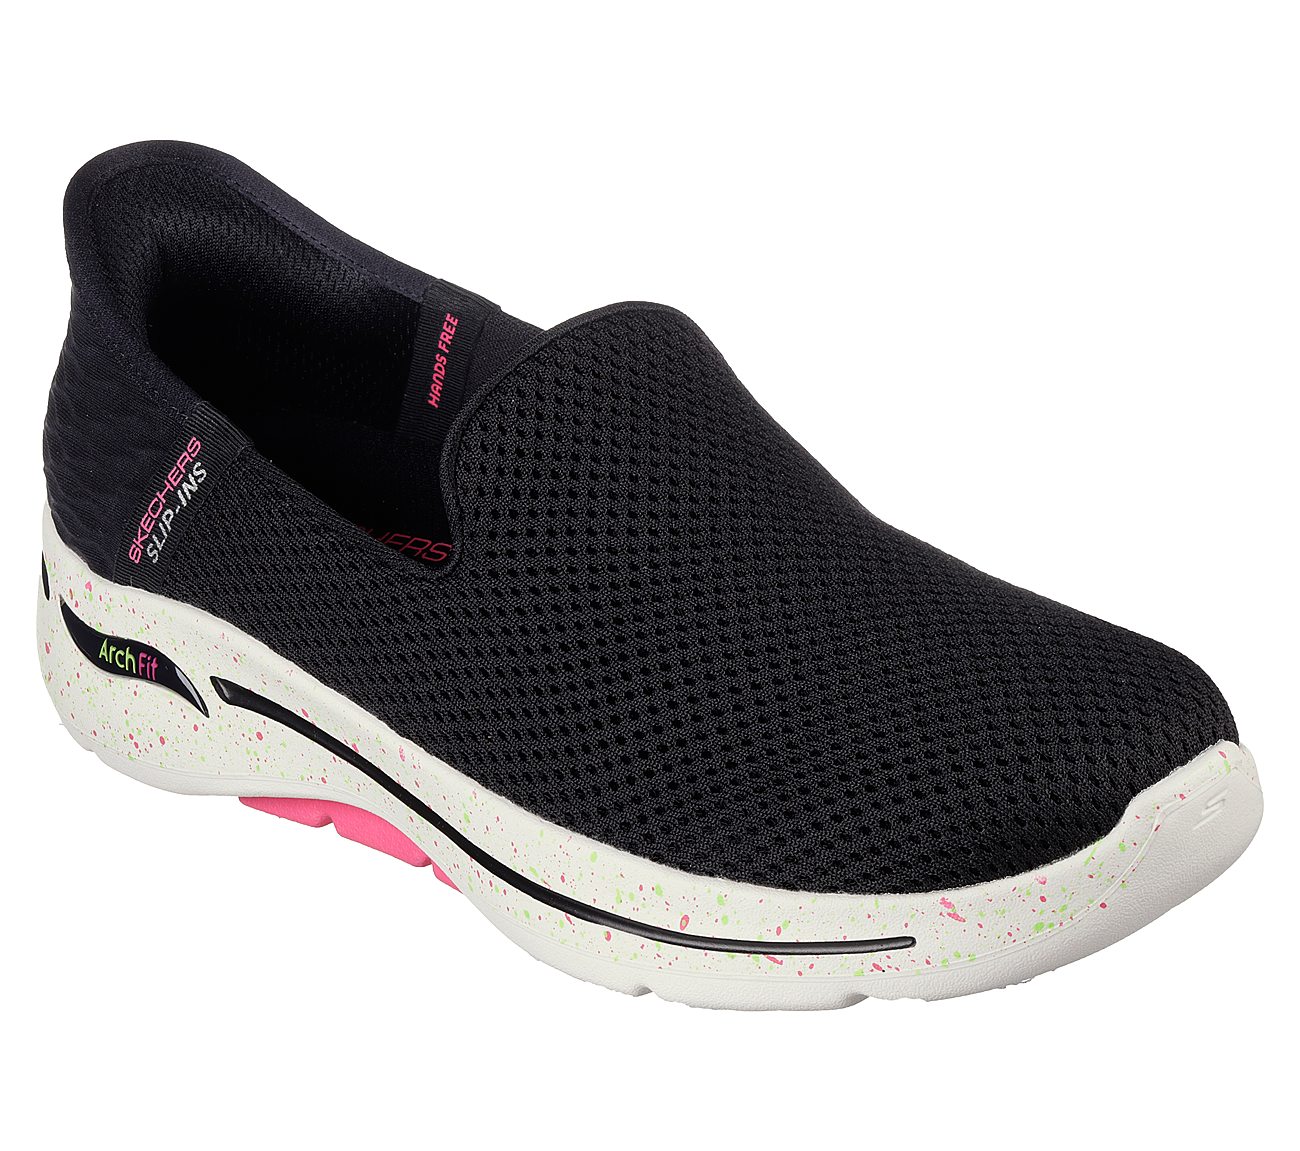 GO WALK ARCH FIT, BLACK/HOT PINK Footwear Right View